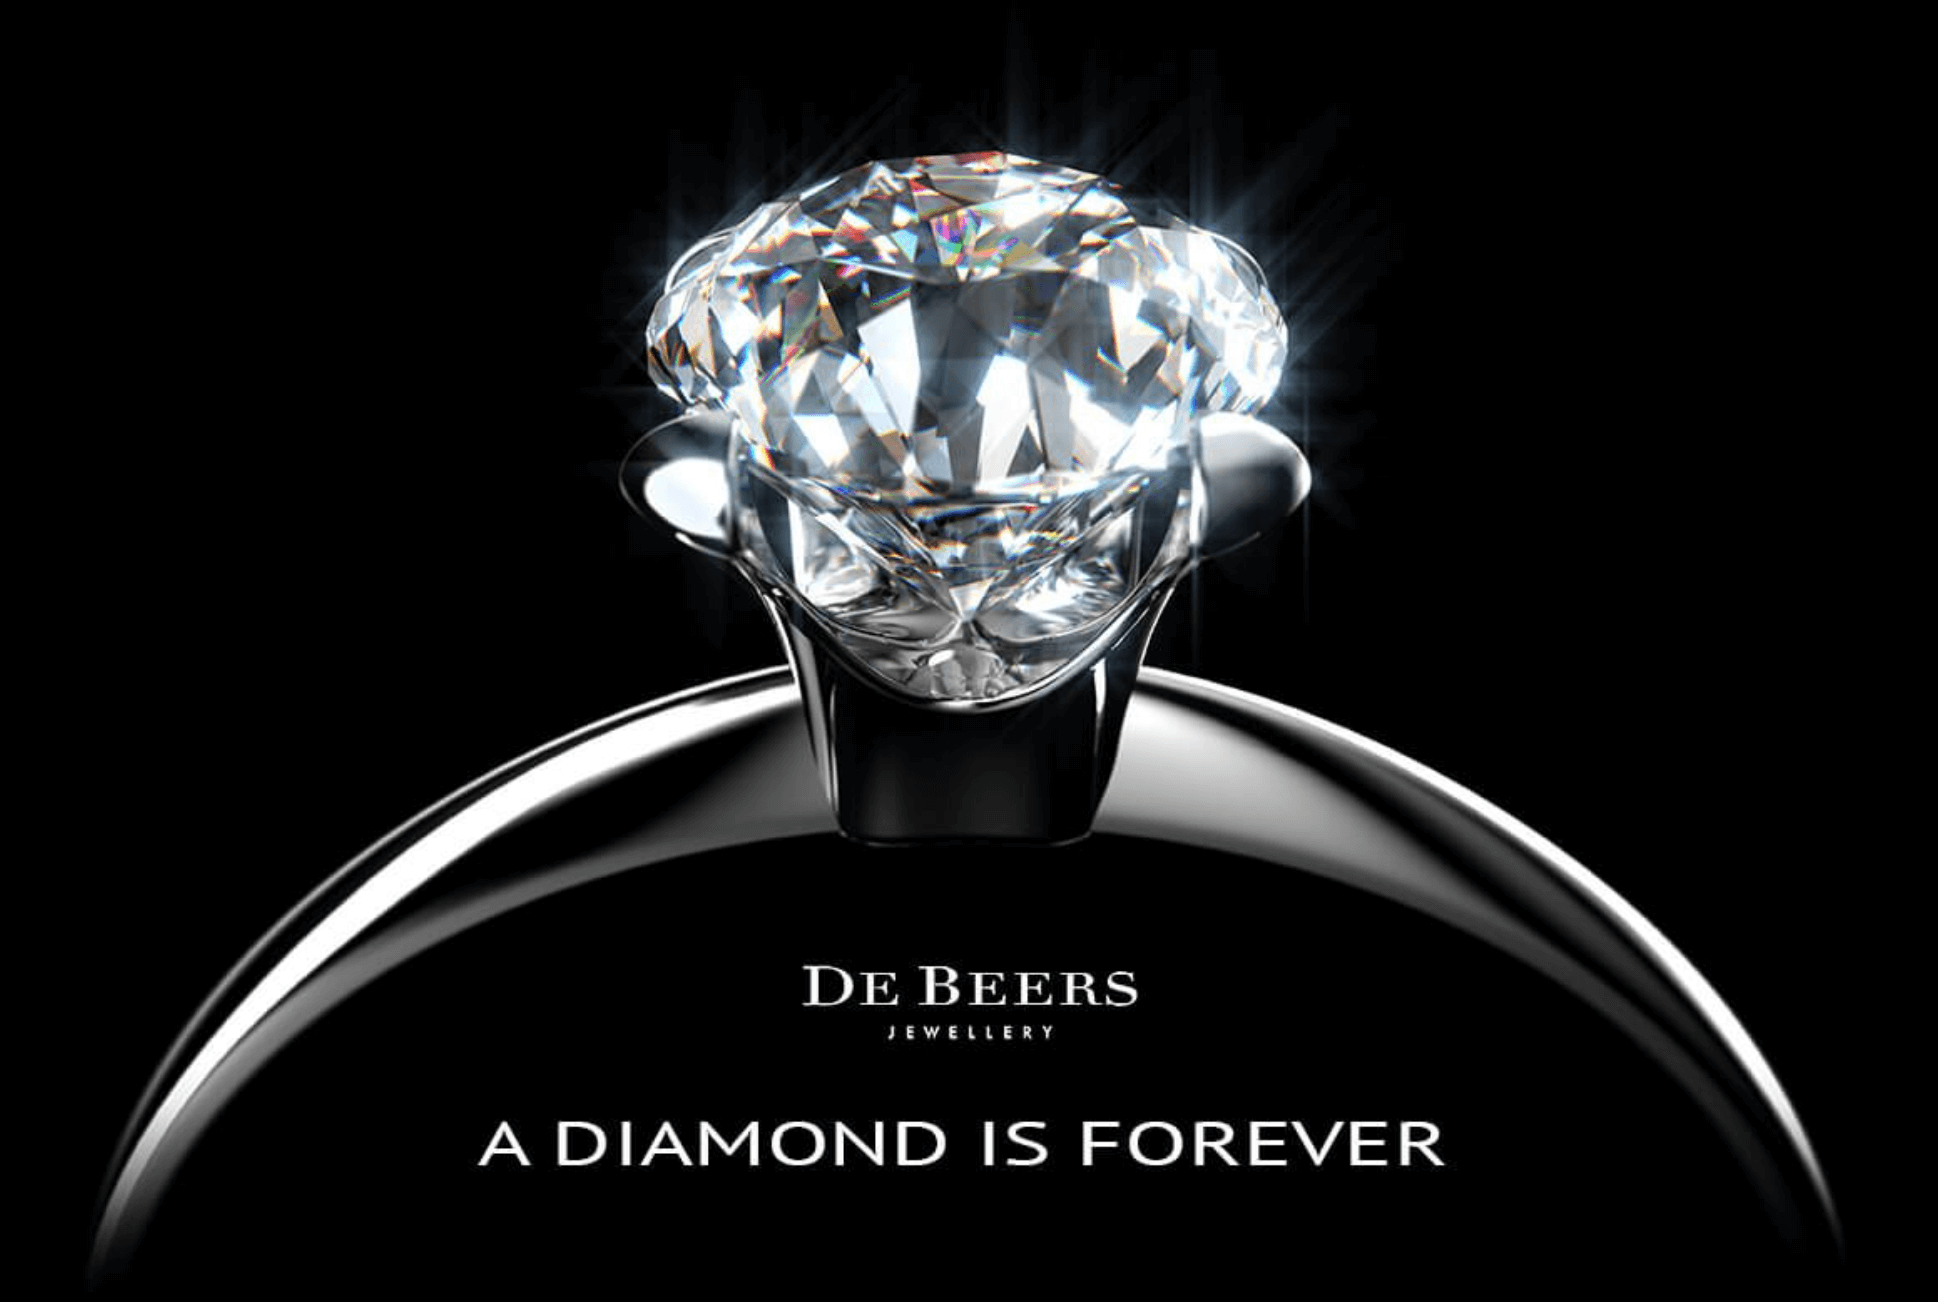 A closeup of a diamond ring with text that reads "De Beers Jewelry: A Diamond is Forever"